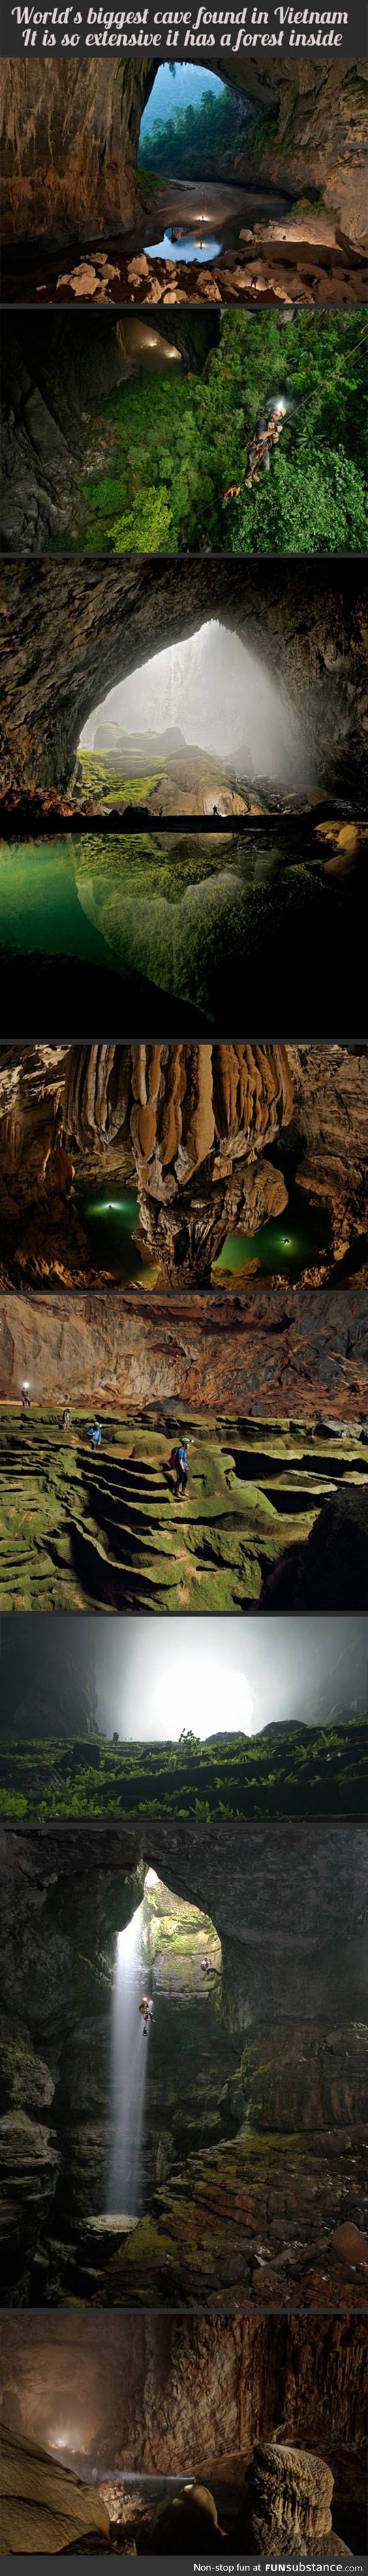 The largest cave in the world in pictures